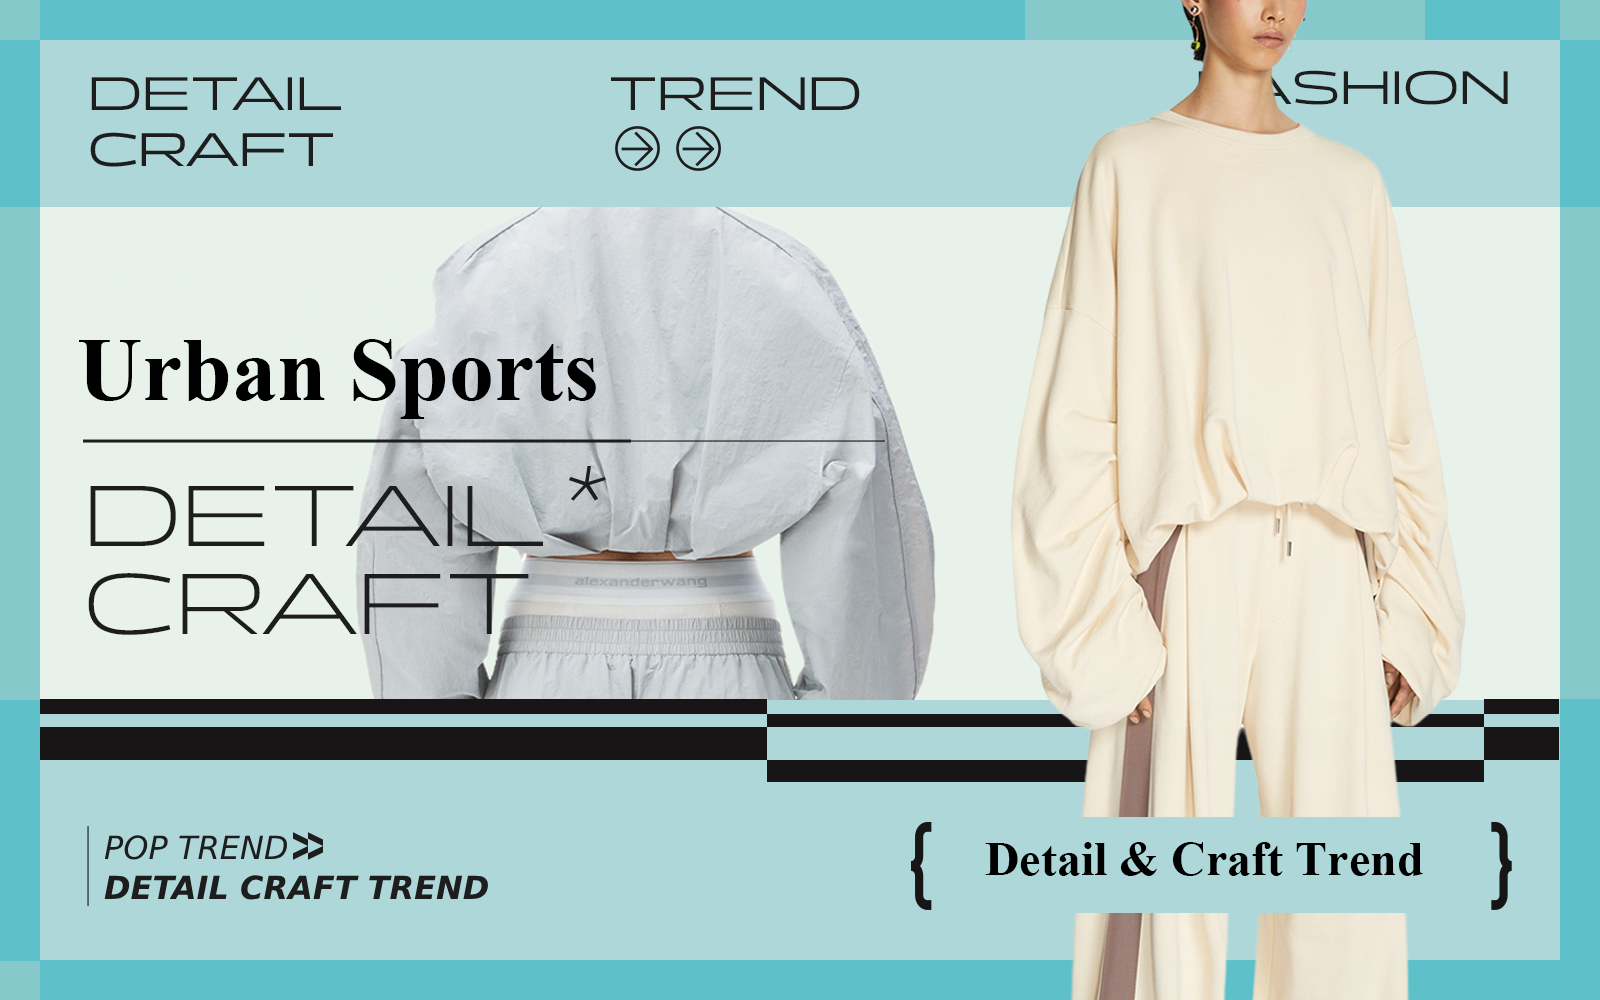 Urban Sports -- The Detail & Craft Trend for Womenswear